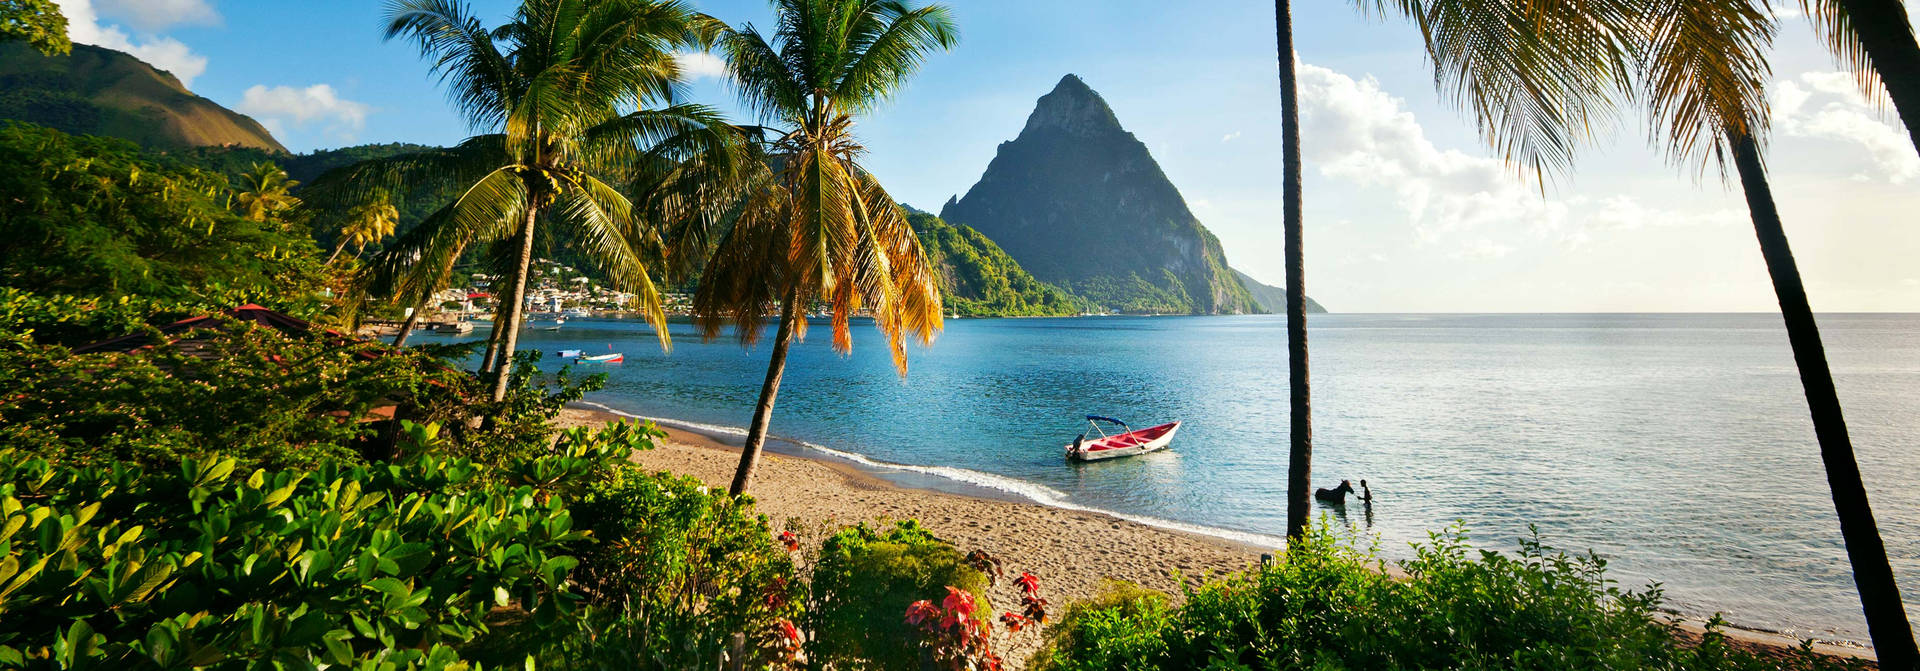 Kano ved St Lucia Bay Wallpaper